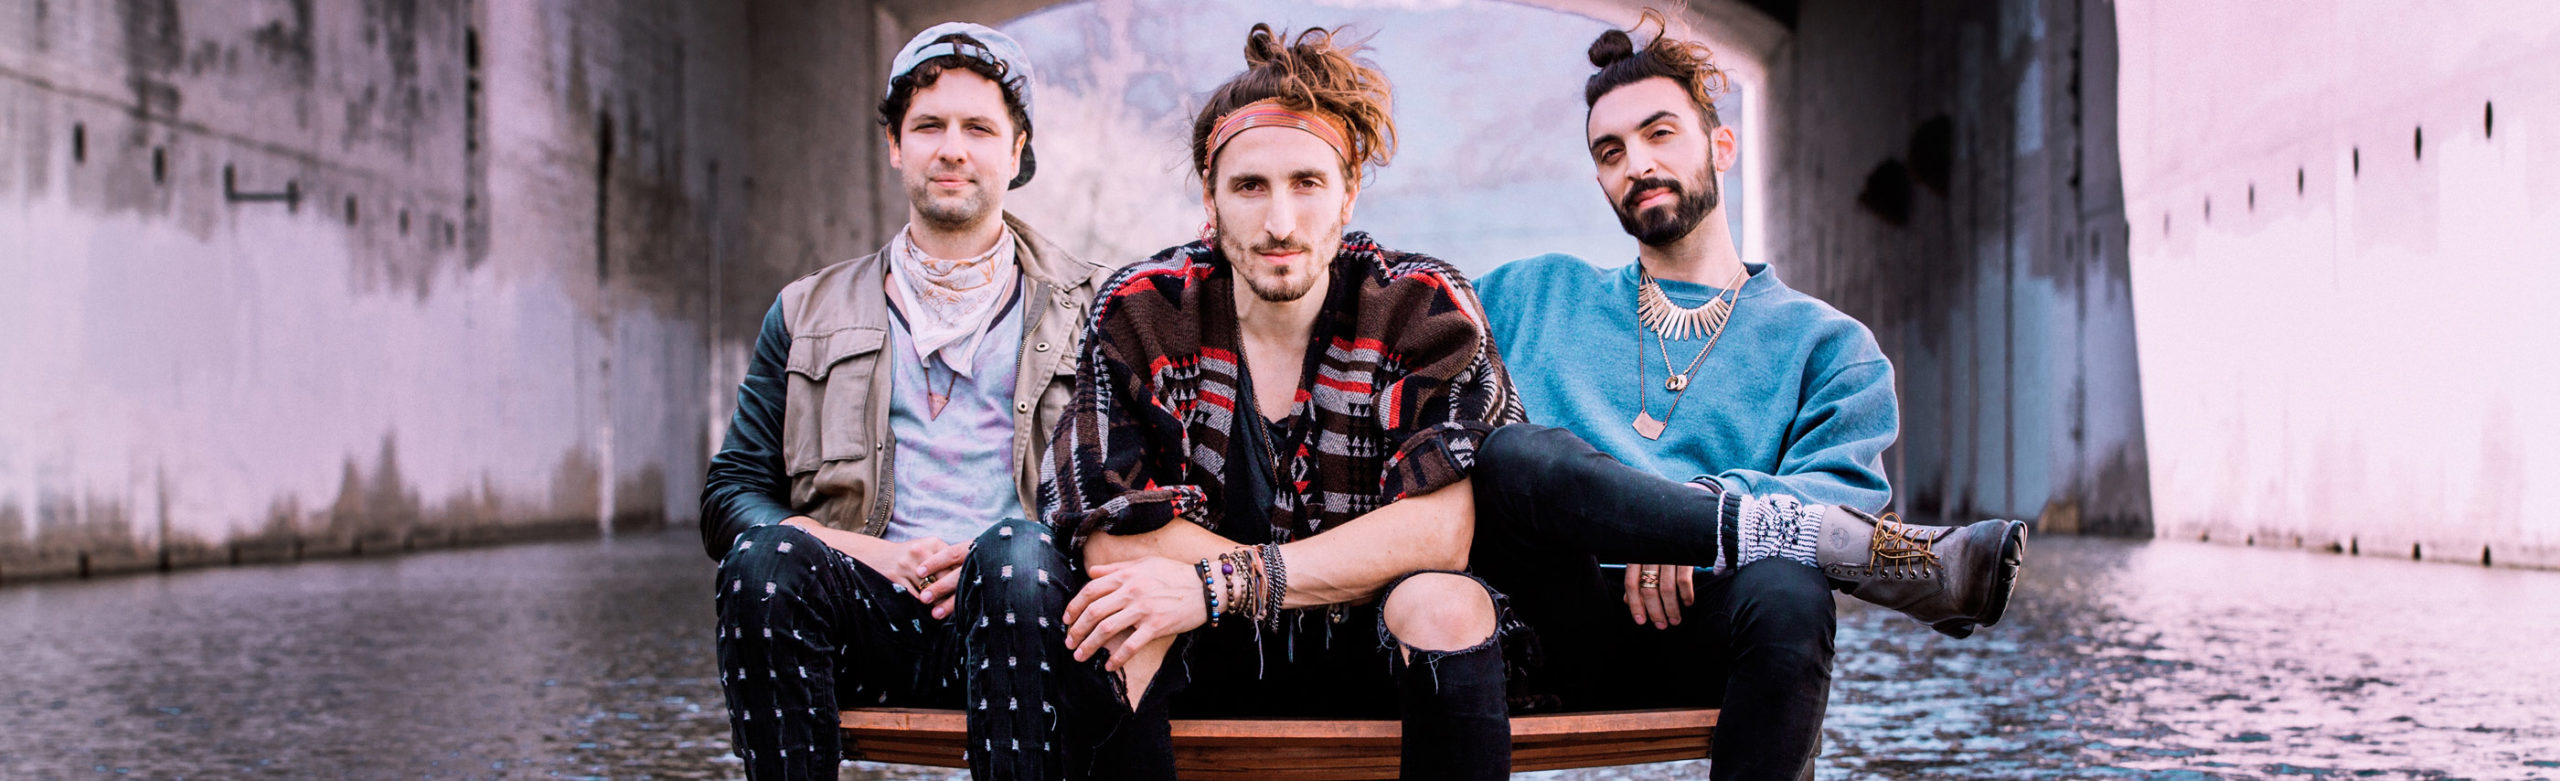 Magic Giant Ticket + CD Giveaway Image